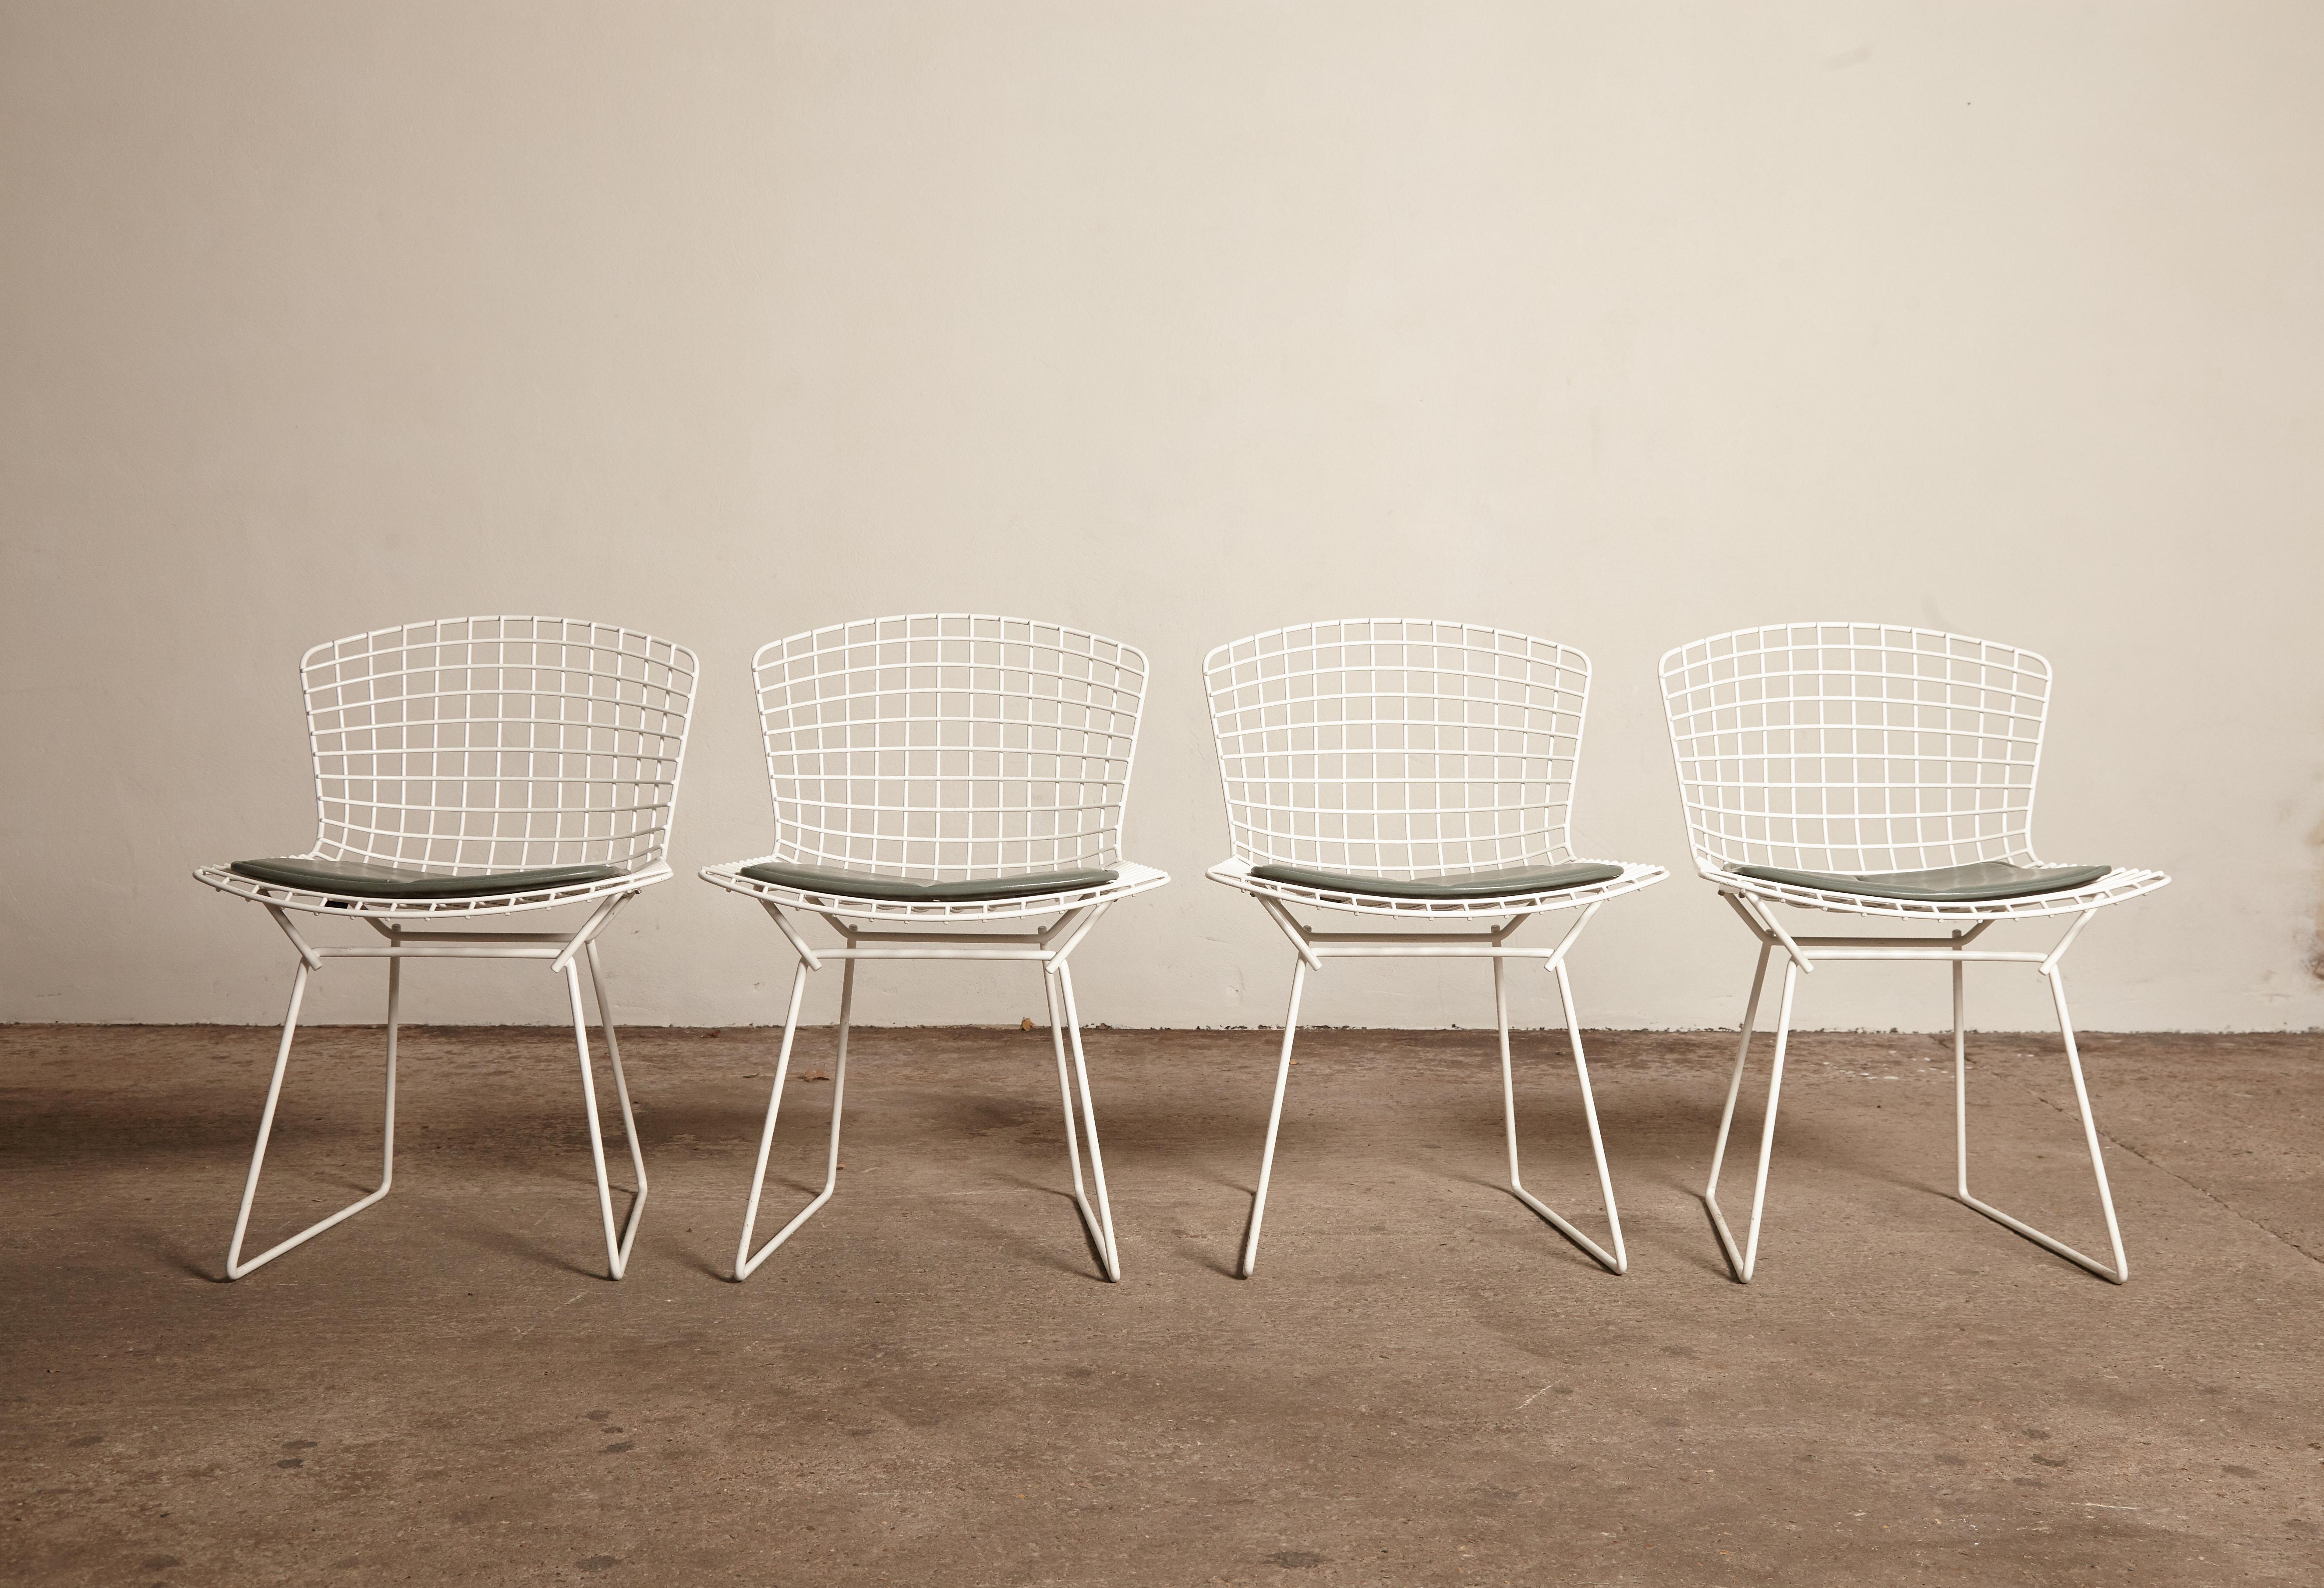 A set of four original Harry Bertoia for Knoll white wire chairs with original green seat pads, USA, 1960s.  Ships worldwide - please contact us directly for a quote.